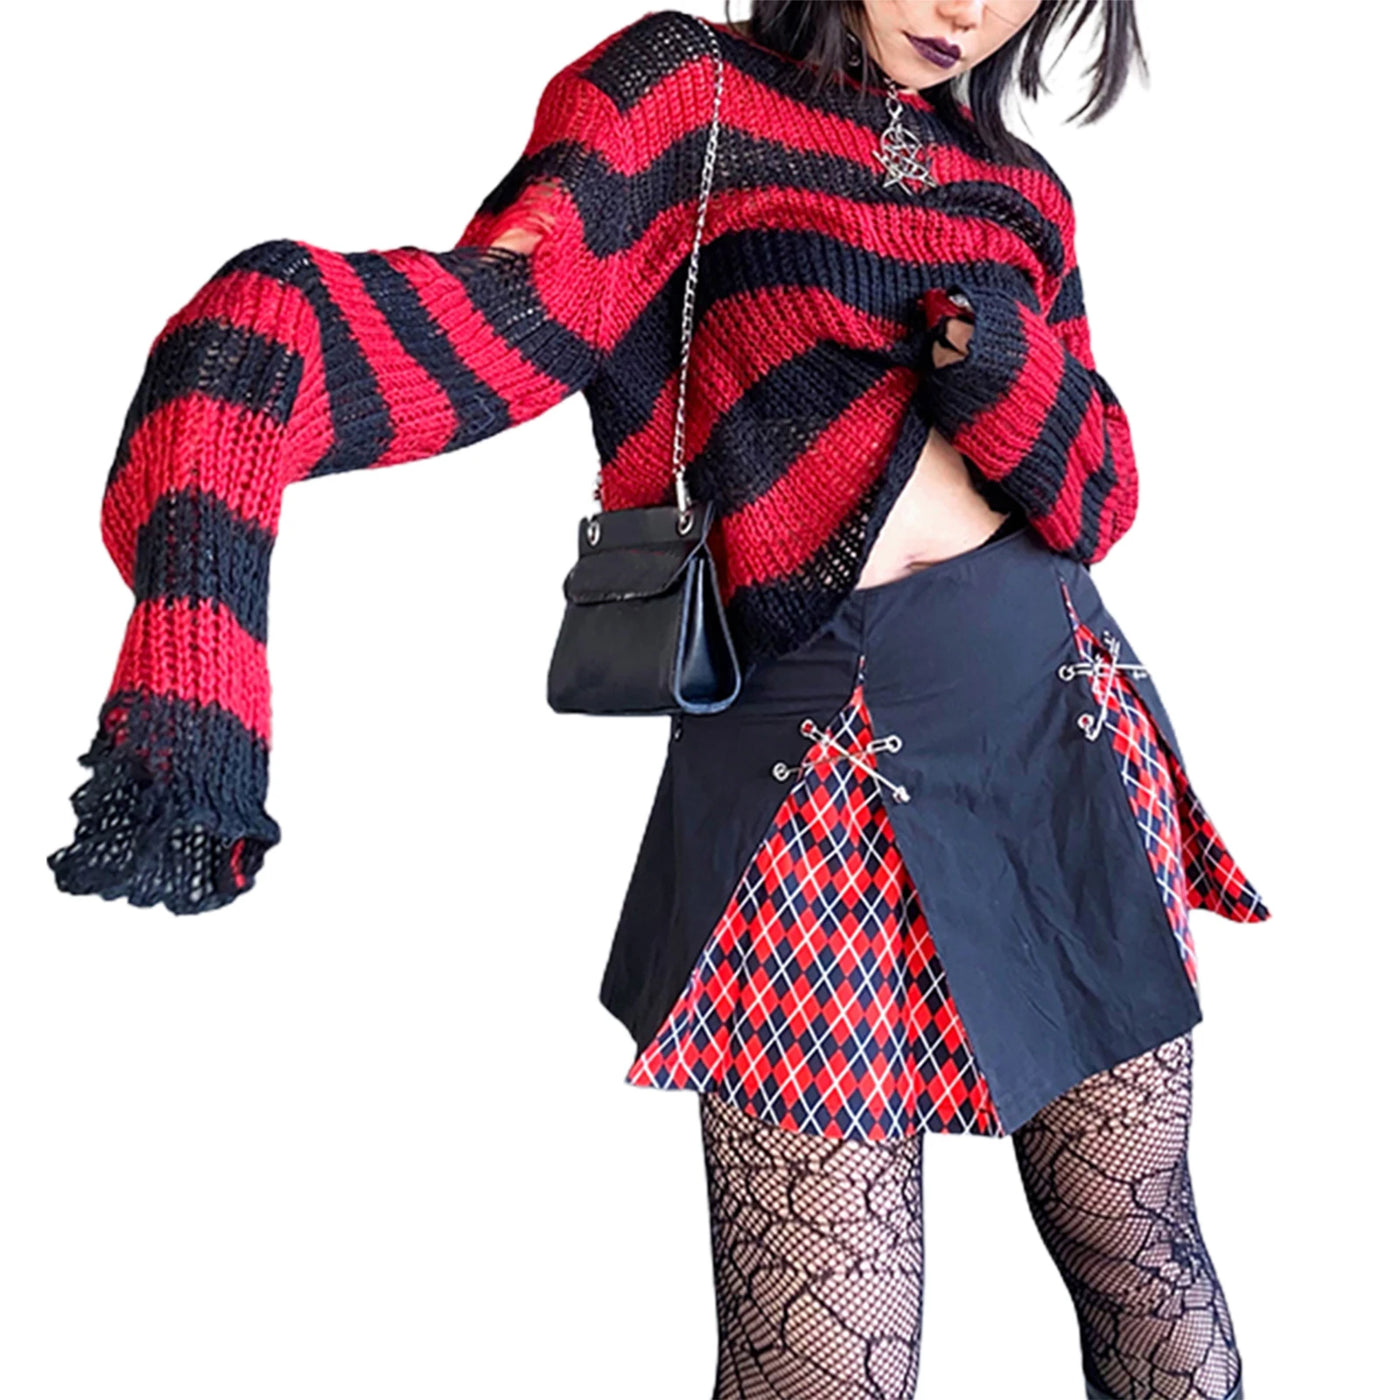 Goth Punk Gothic Sweater Oversized Pullovers Women Striped Cool Hollow Out Hole Broken Jumper Harajuku Aesthetics Sweater